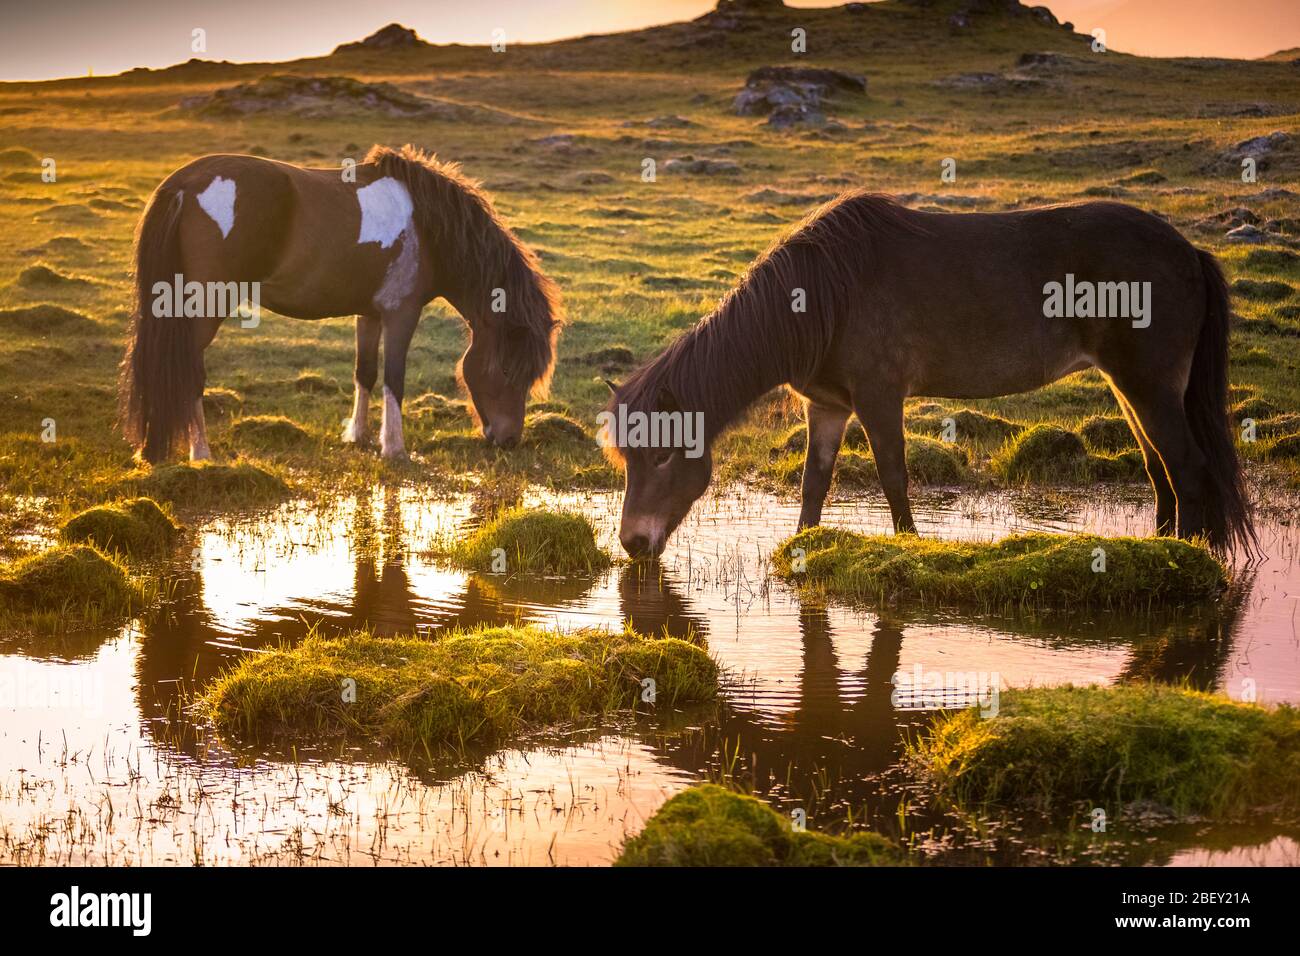 Icelandic Horse. Two horses drinking from a pond at sunset. Iceland Stock Photo